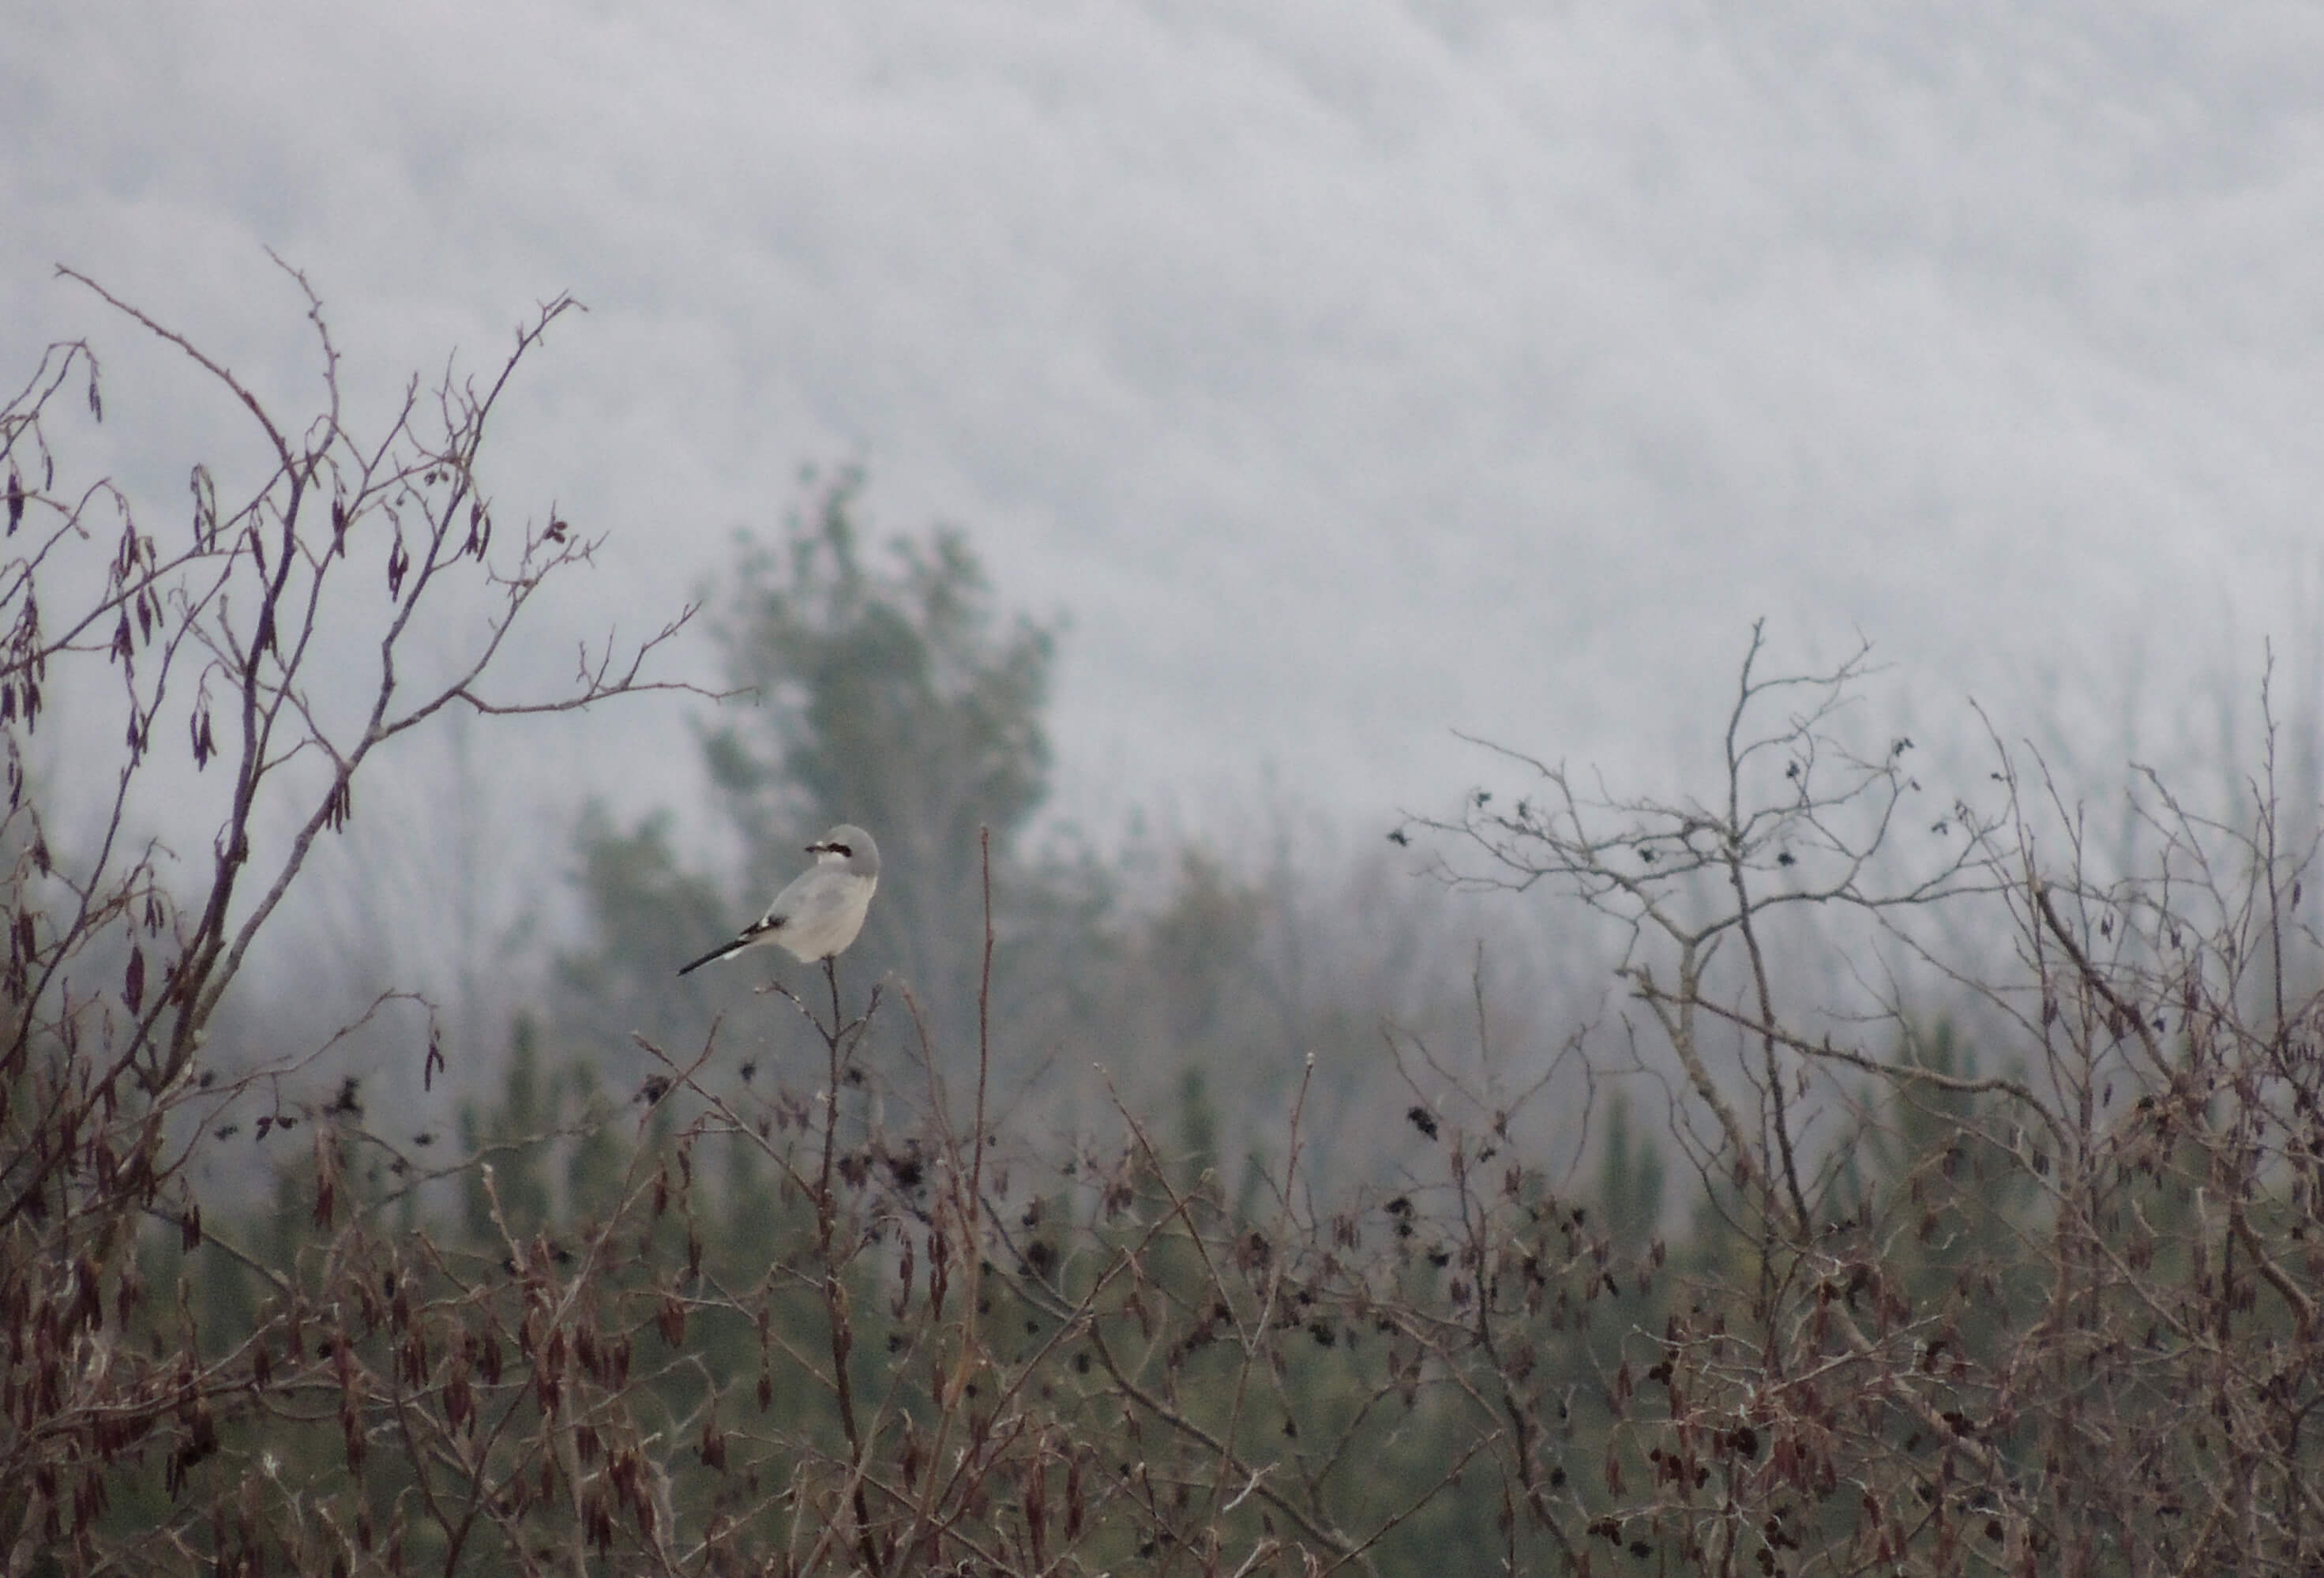 Our second Northern Shrike for the day.